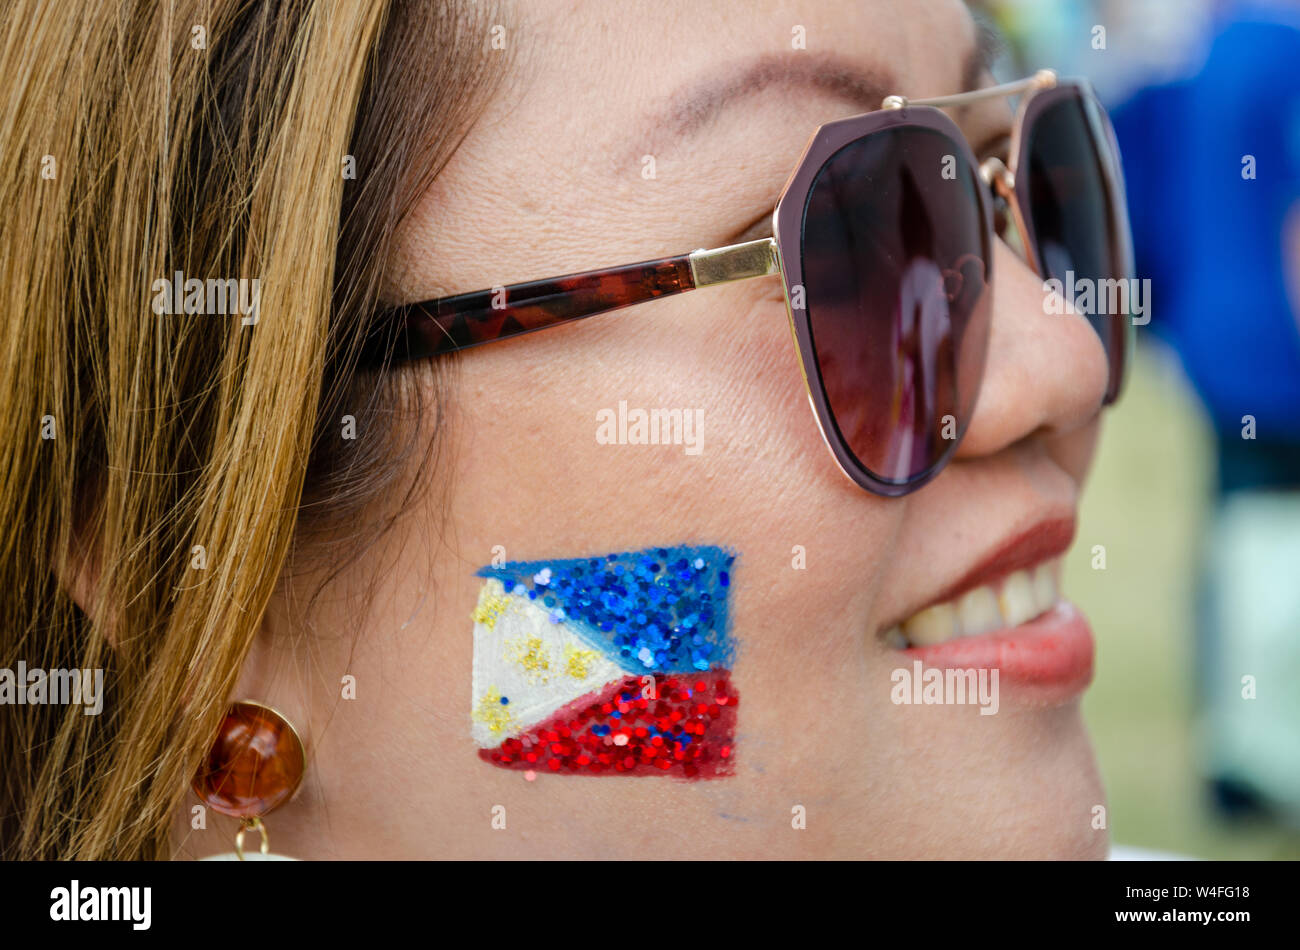 A Filipino lady wearing sunglasses with the flag of The Philippines painted with face paint and glitter on her cheek. Stock Photo